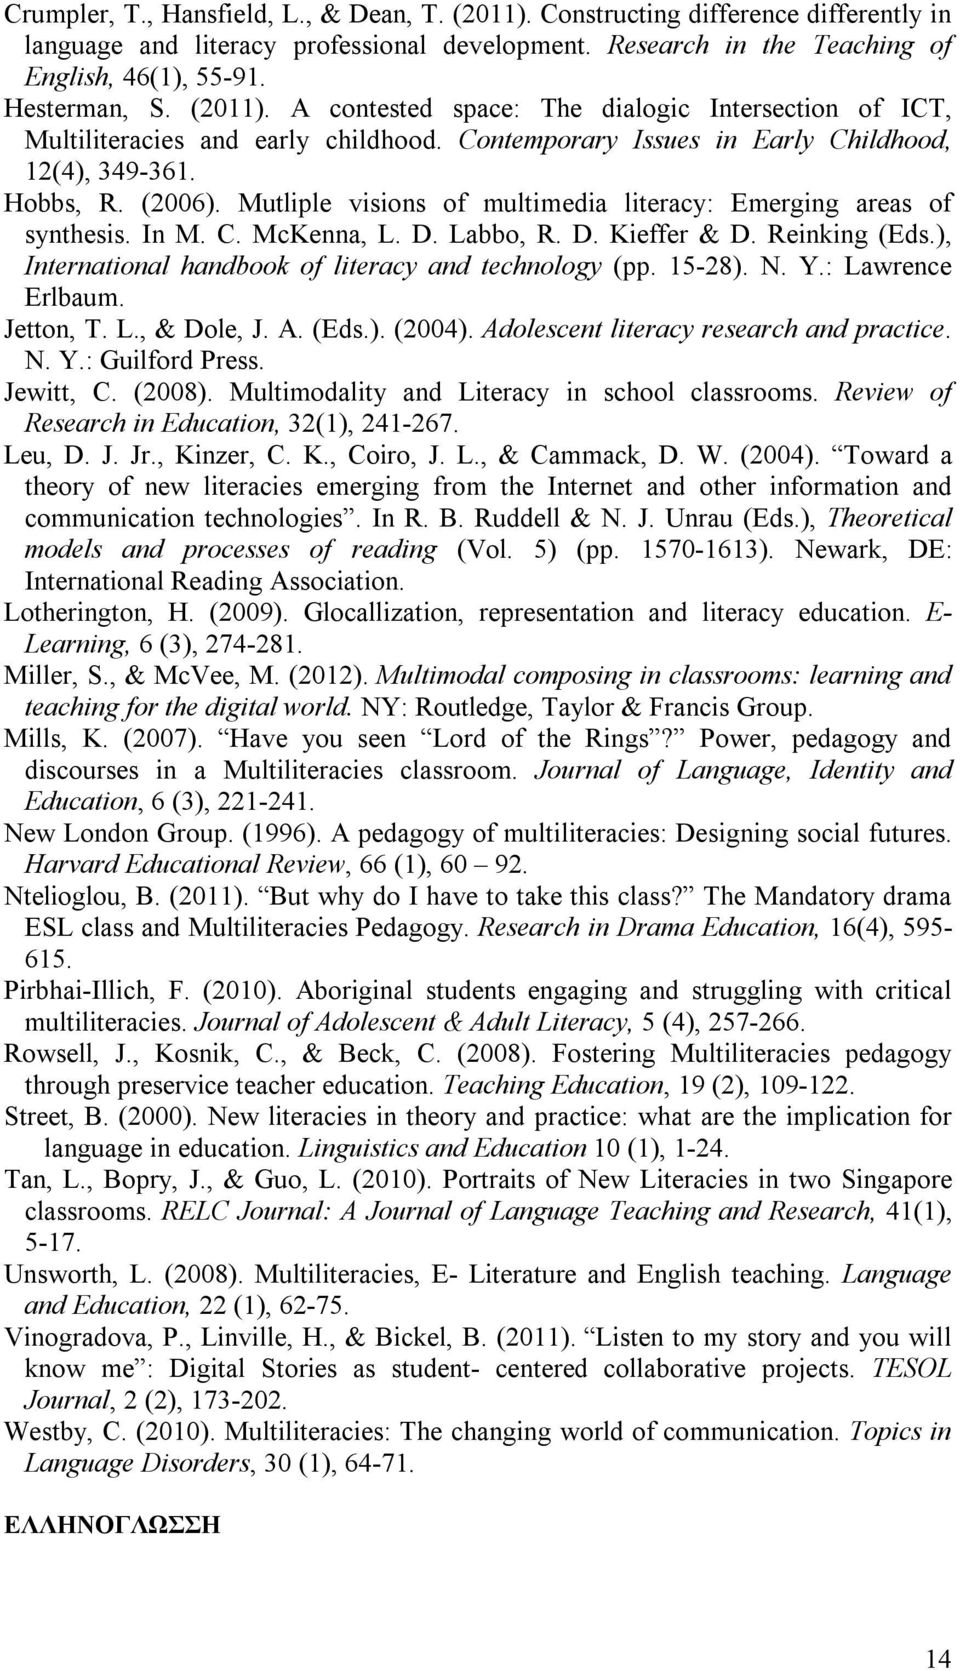 Mutliple visions of multimedia literacy: Emerging areas of synthesis. In M. C. McKenna, L. D. Labbo, R. D. Kieffer & D. Reinking (Eds.), International handbook of literacy and technology (pp. 15-28).